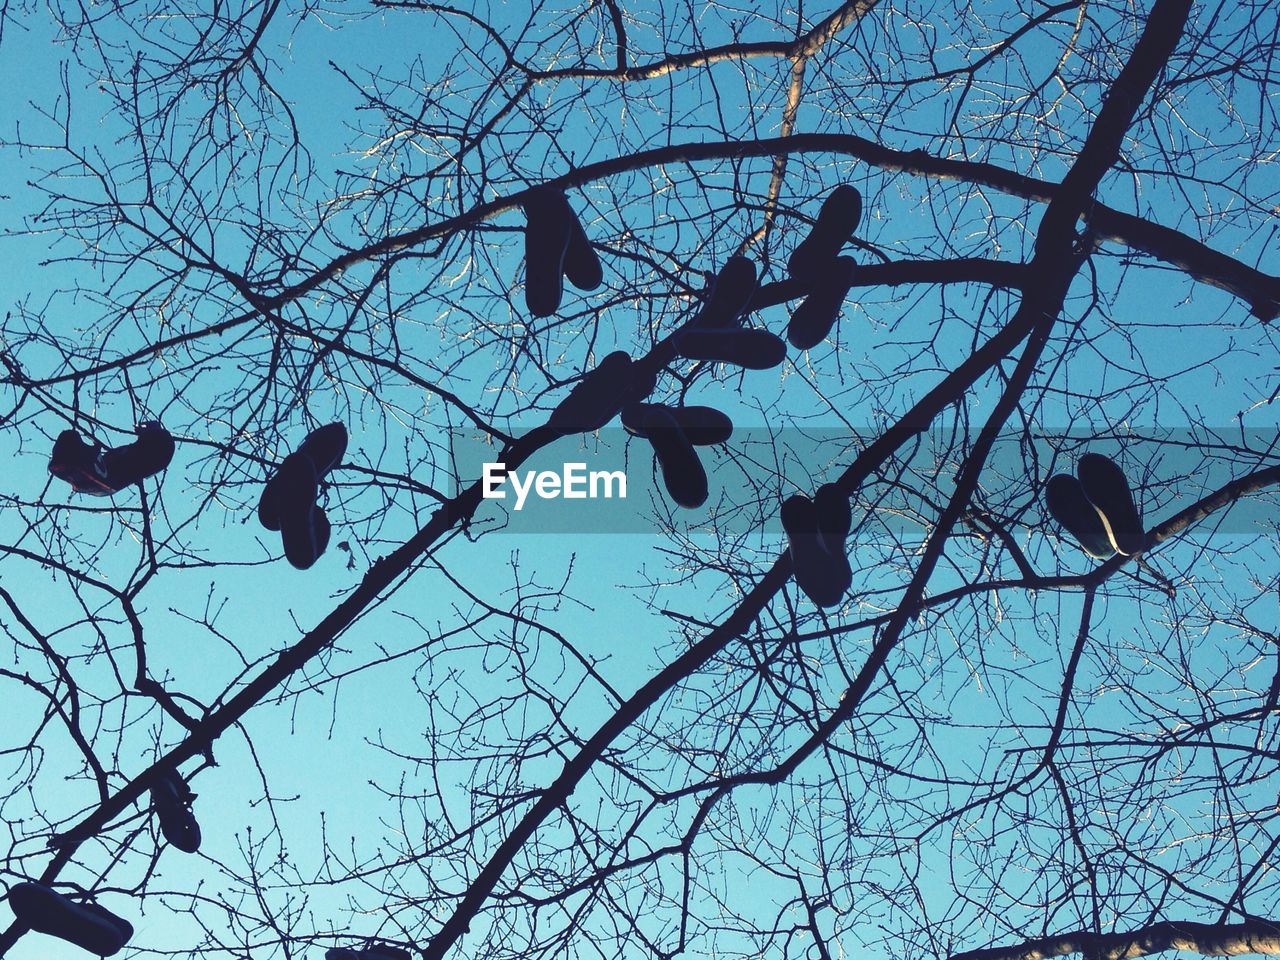 Low angle view of shoes hanging on bare tree against blue sky